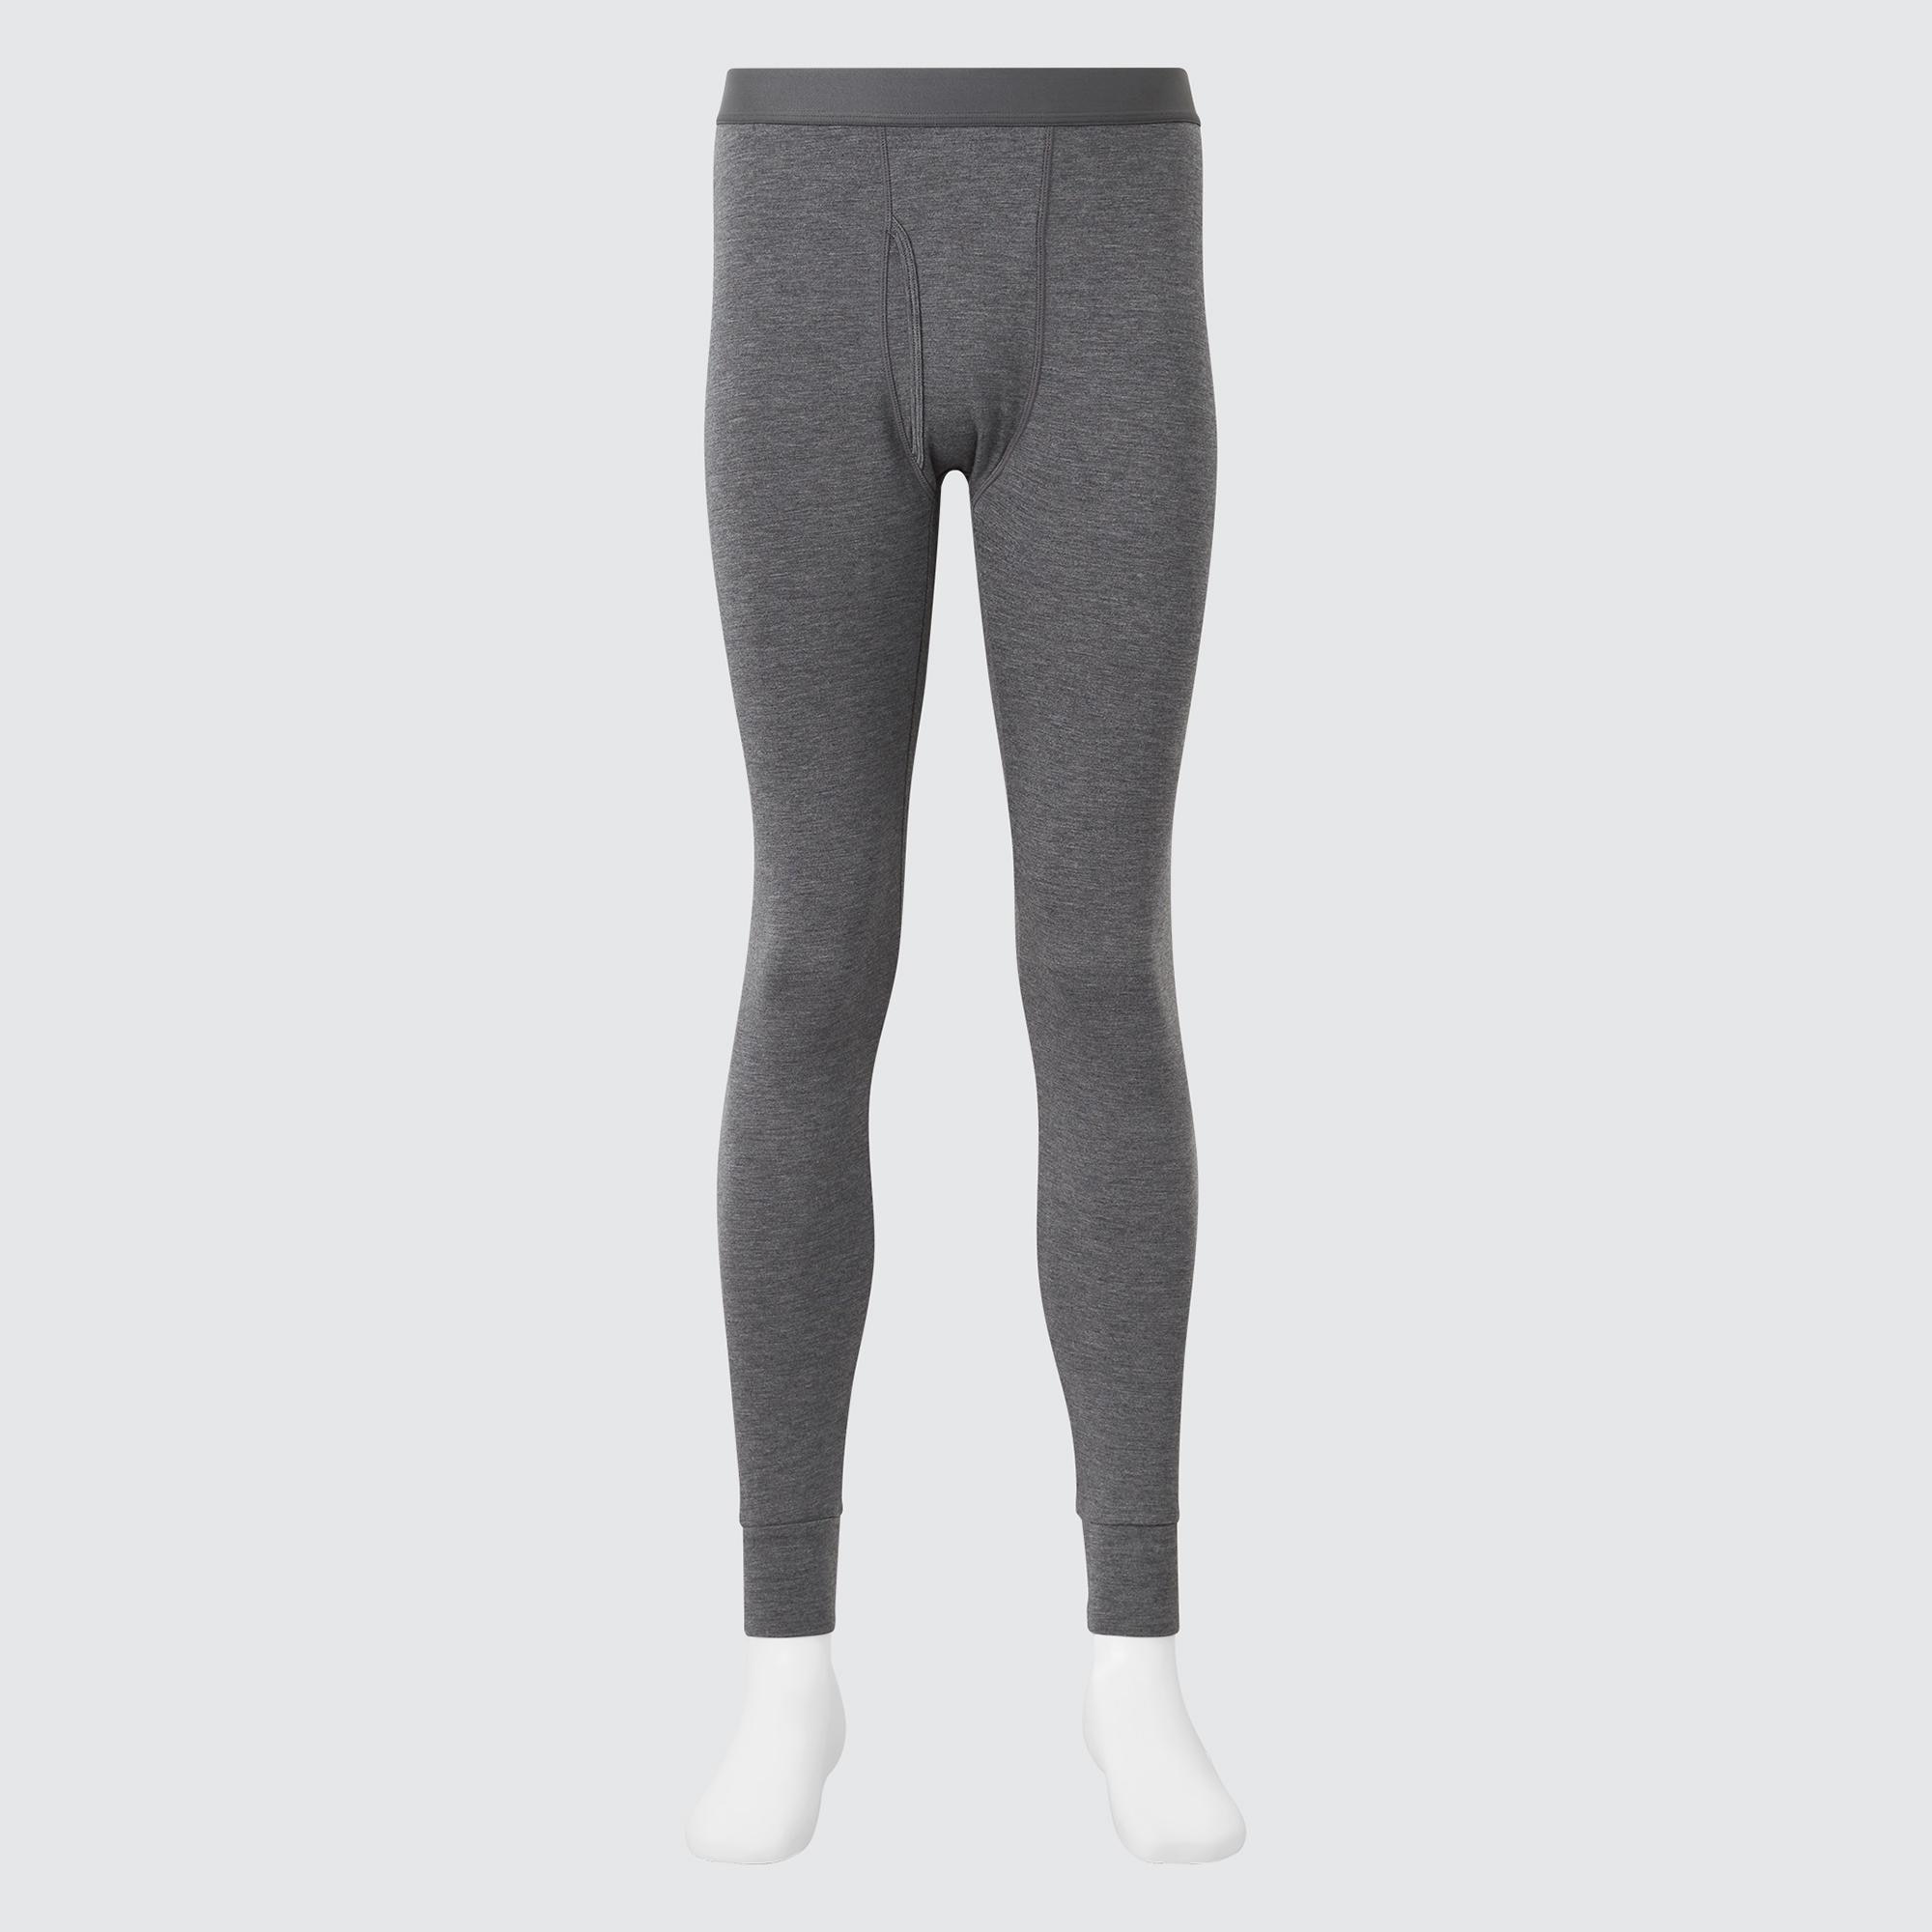 HEATTECH Extra Warm Cotton Thermal Tights | UNIQLO UK